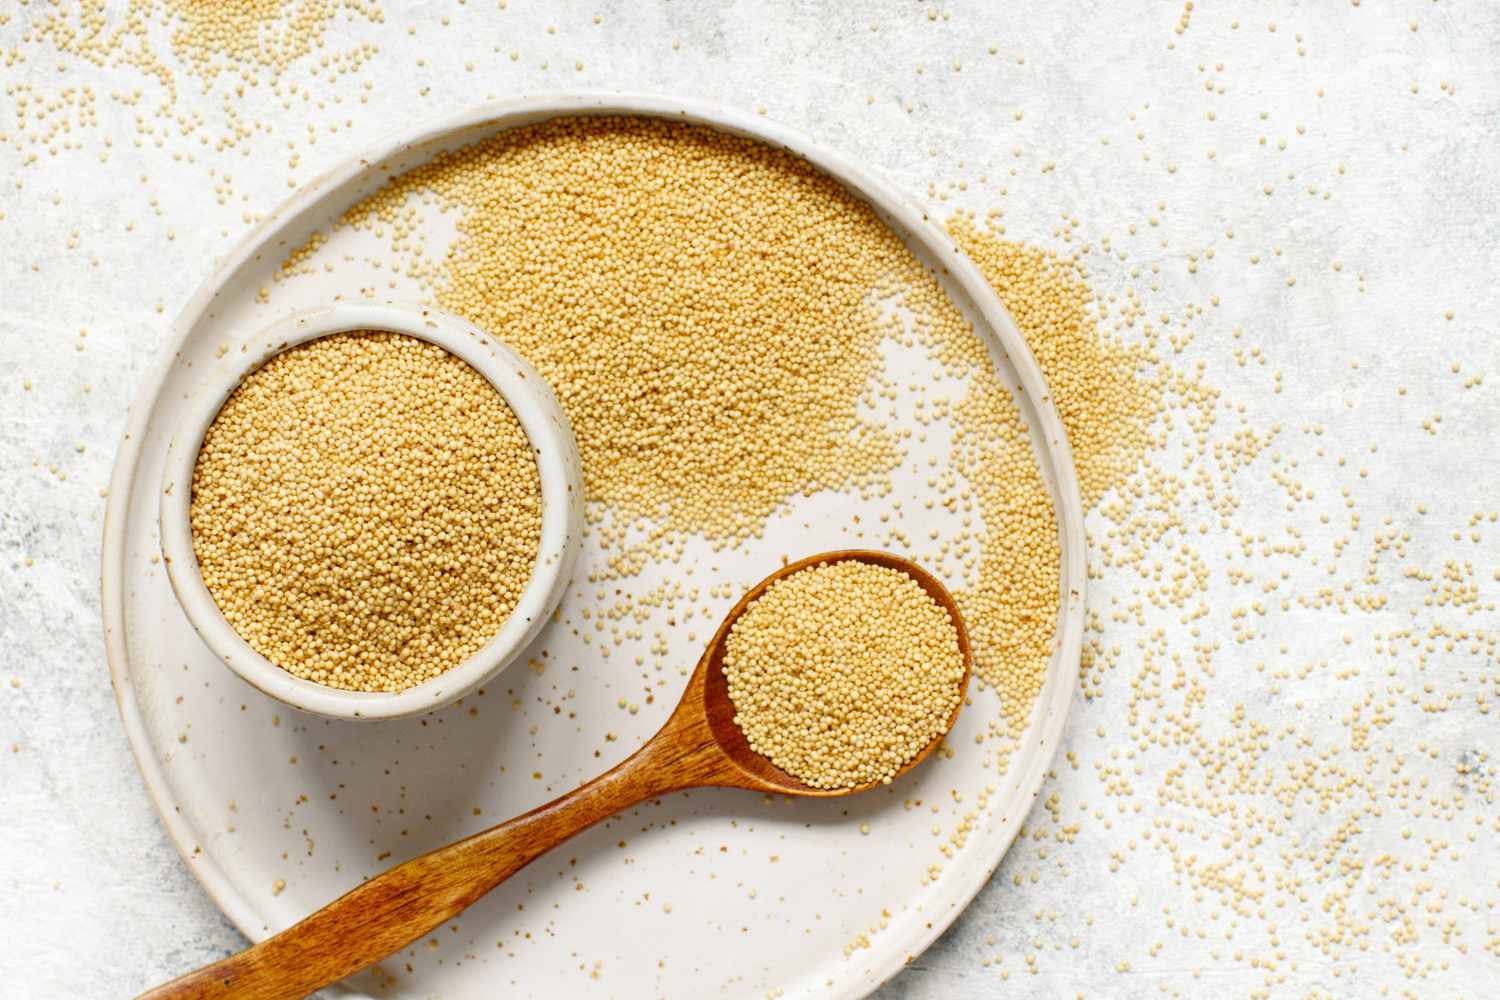 Diversity on the Plate: Amaranth vs. Hulled Millet